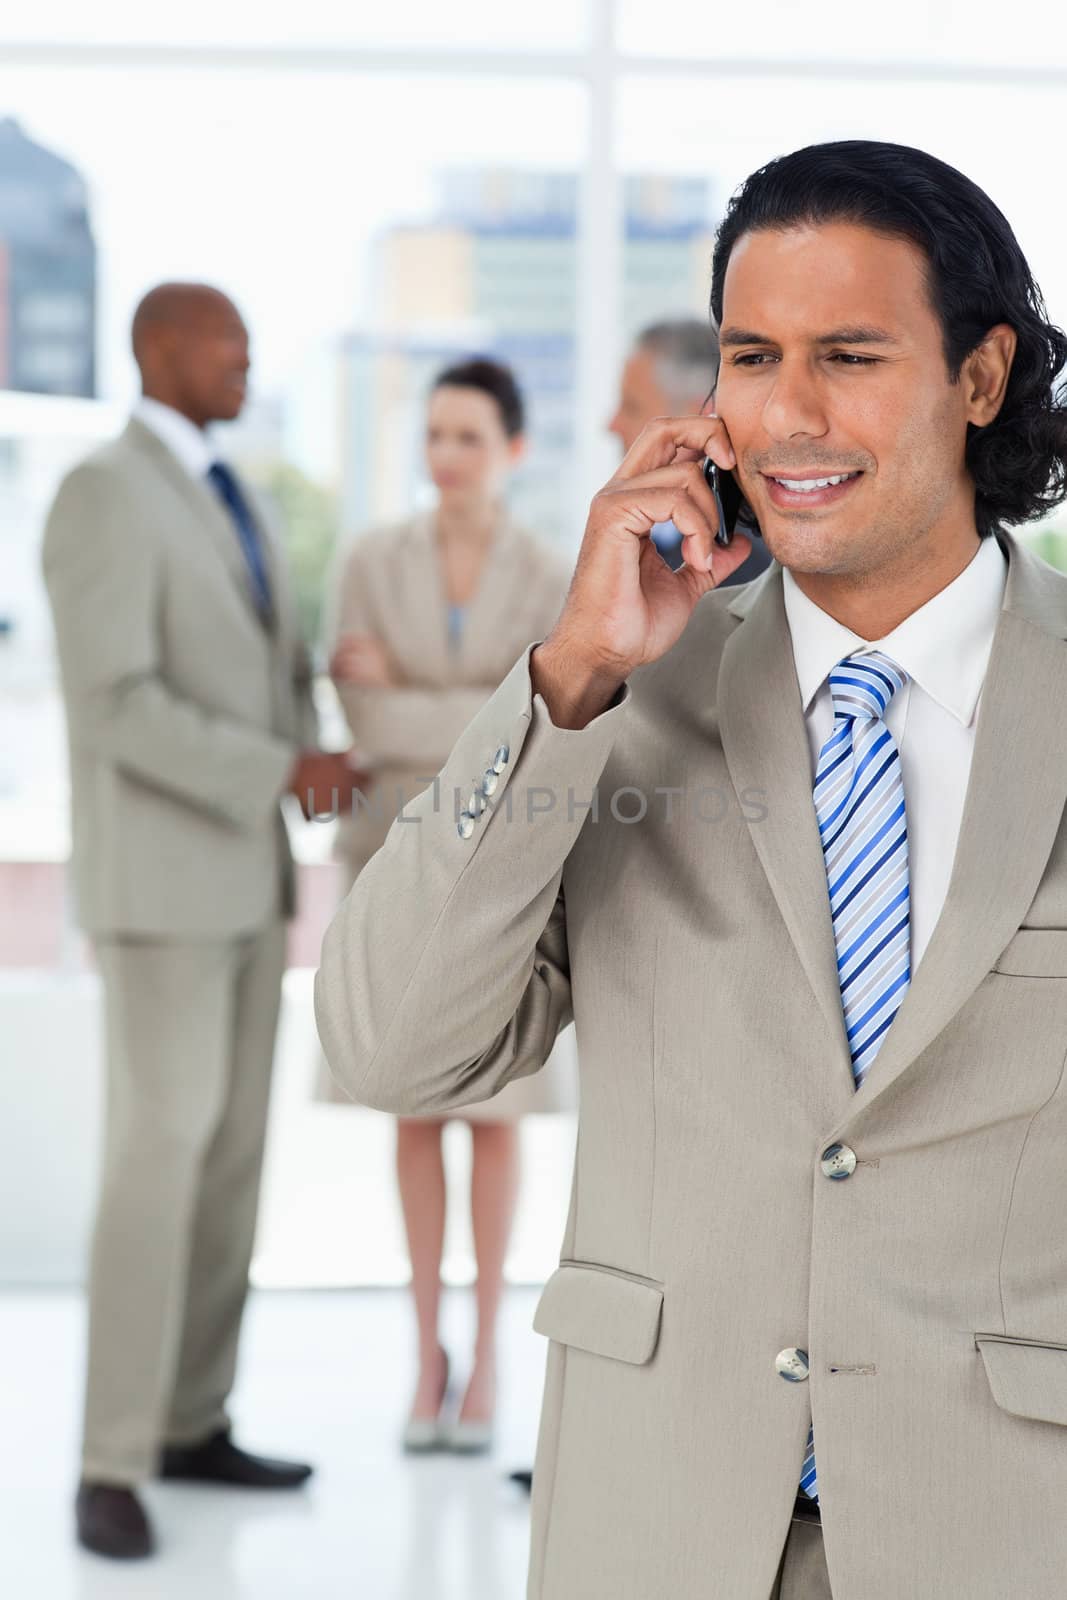 Businessman using a cell phone while his team is talking behind  by Wavebreakmedia